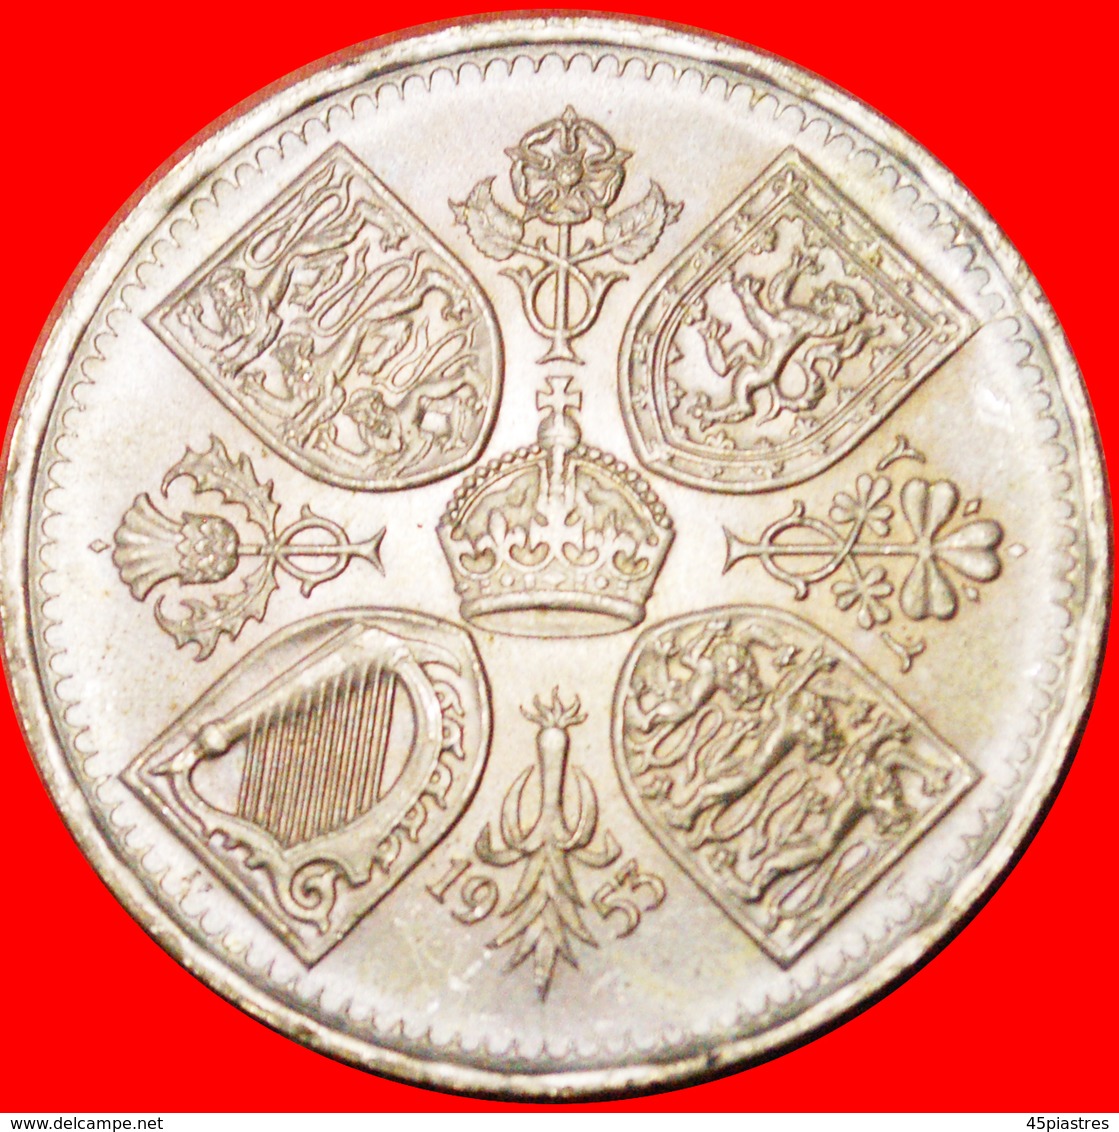 # CORONATION CROWN: GREAT BRITAIN ★ 5 SHILLINGS 1953 FIRST CROWN OF ELIZABETH II UNC MINT LUSTER★LOW START ★ NO RESERVE! - Maundy Sets & Herdenkings